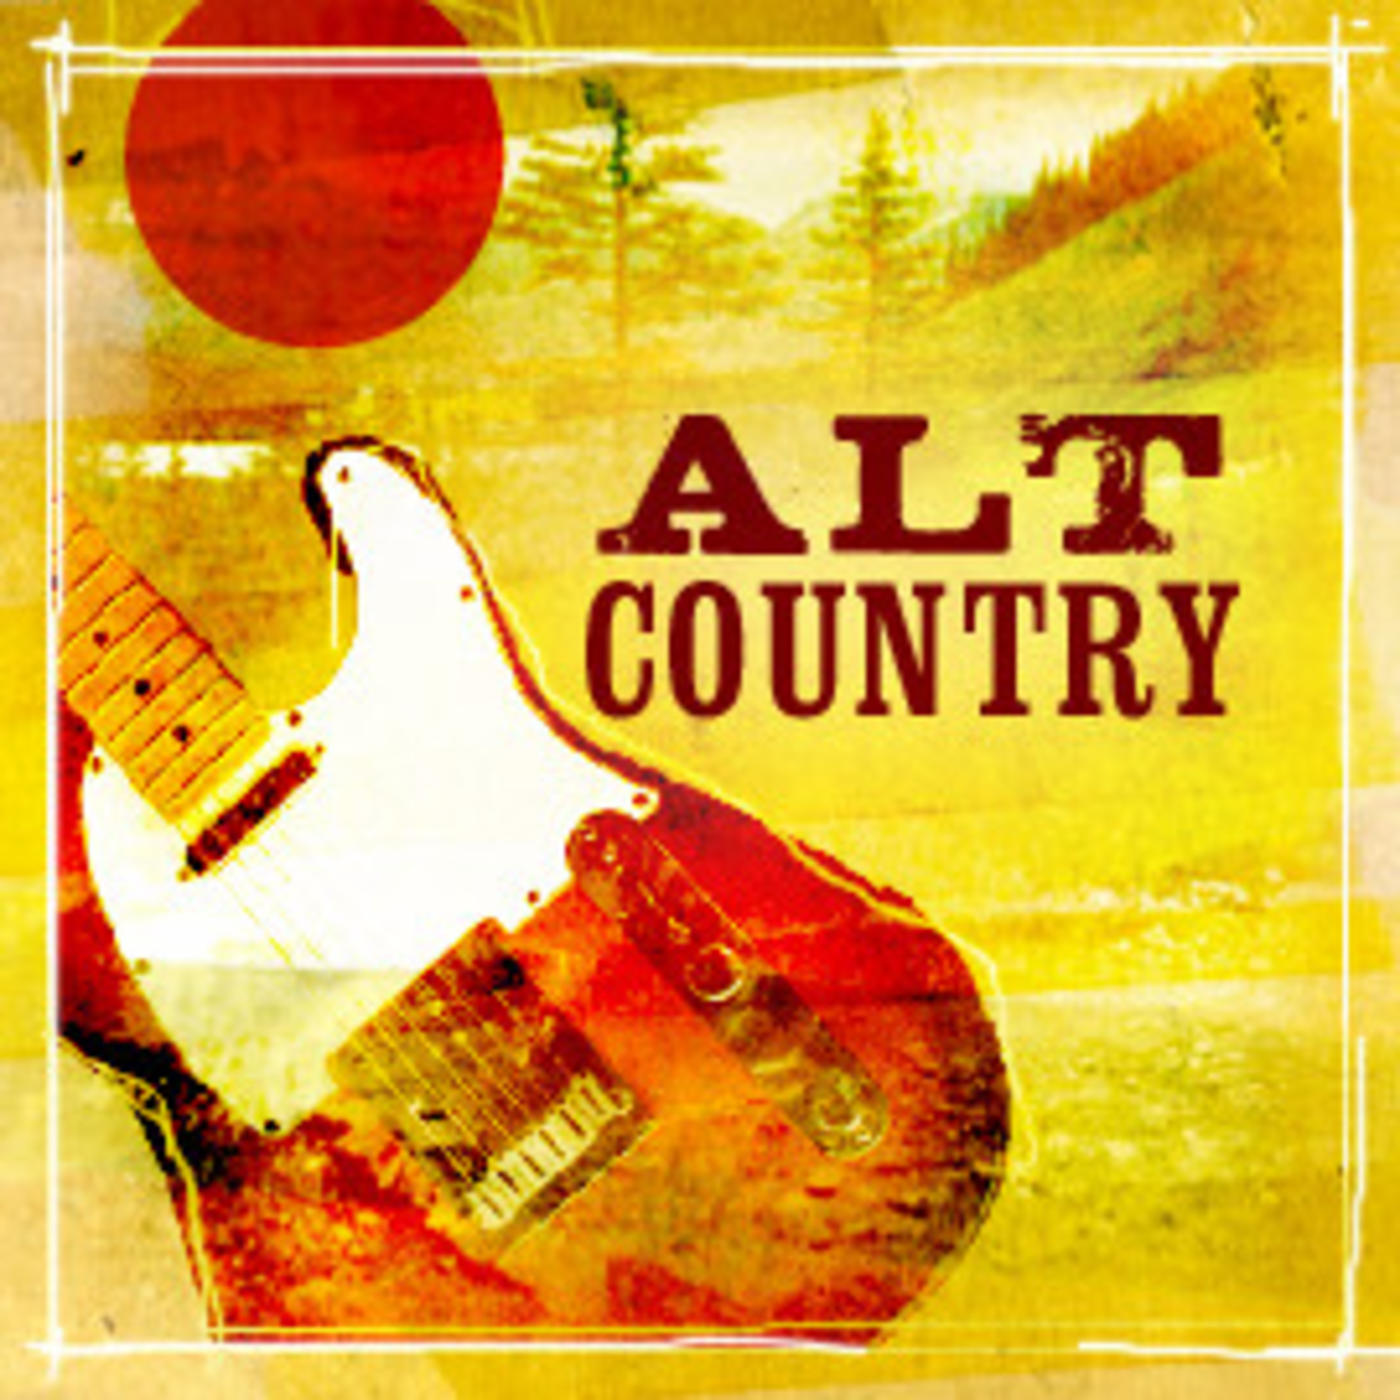 Alt Country - The Band, Old 97's, Son Volt, Emmylou